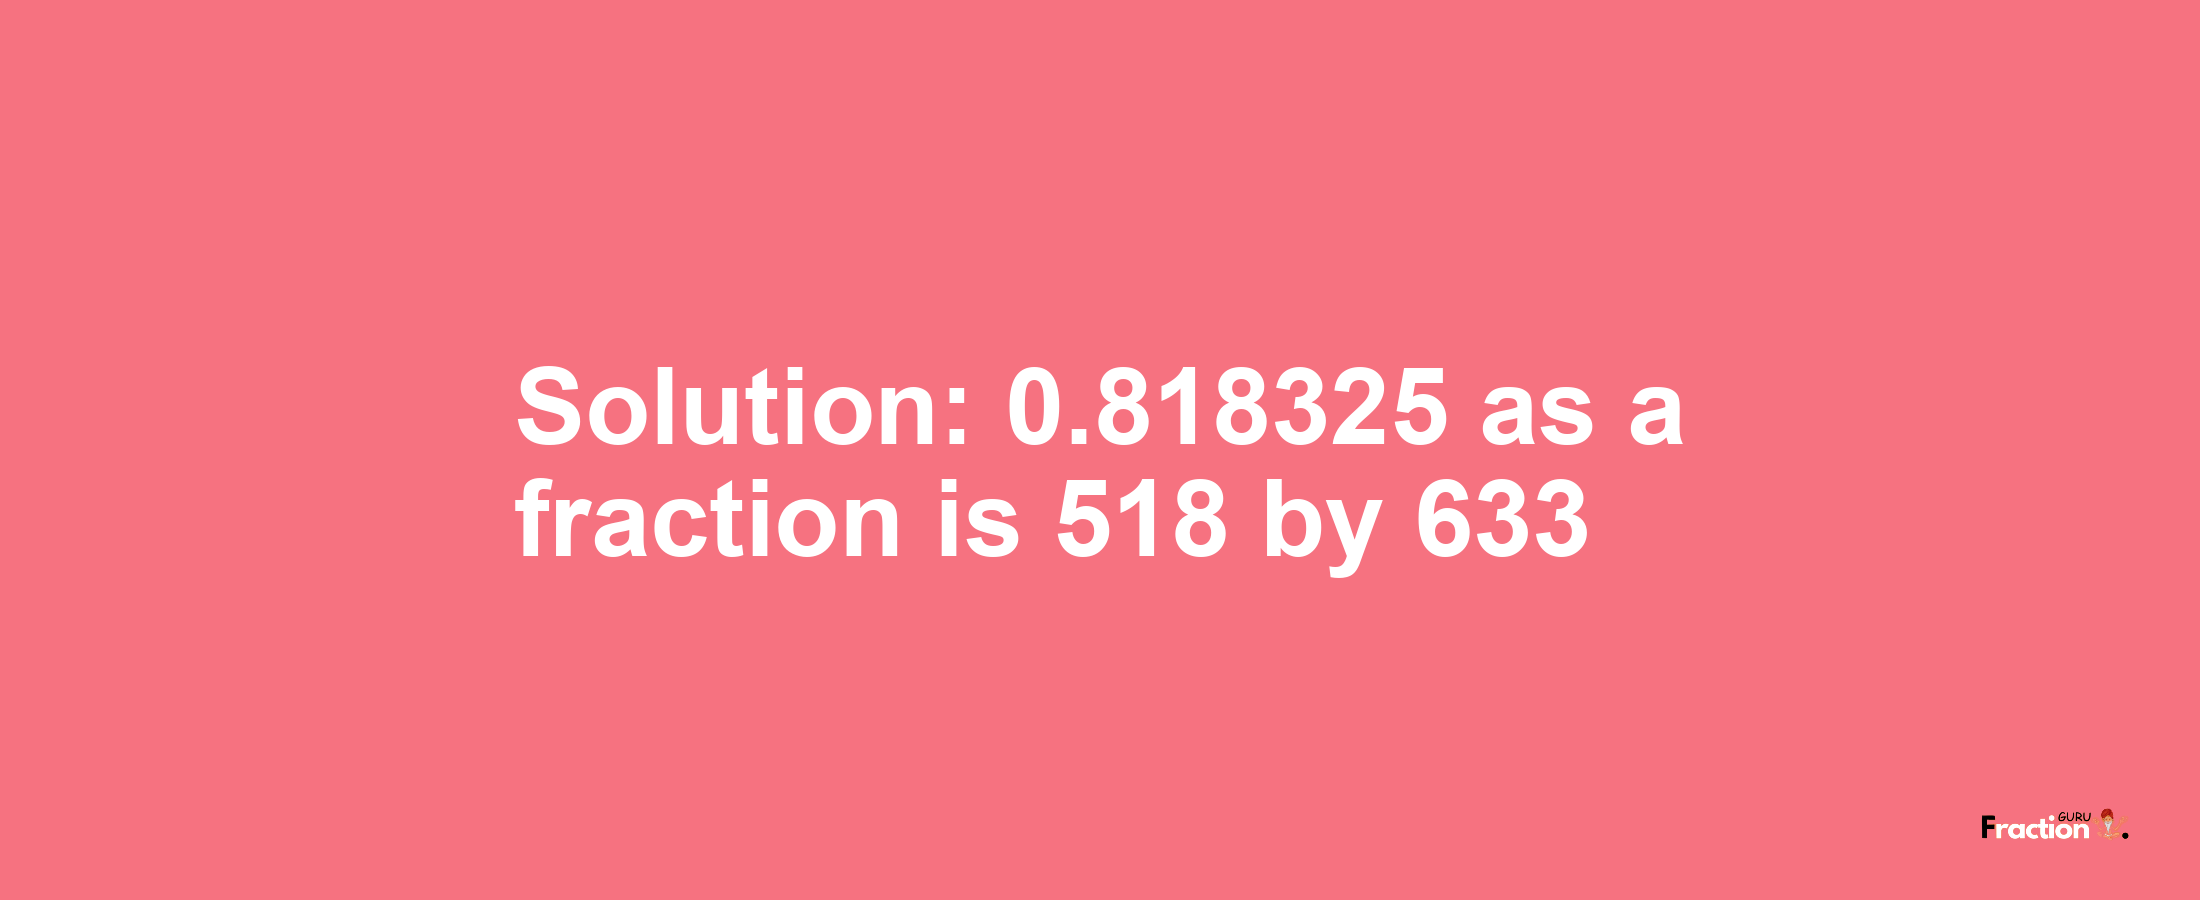 Solution:0.818325 as a fraction is 518/633